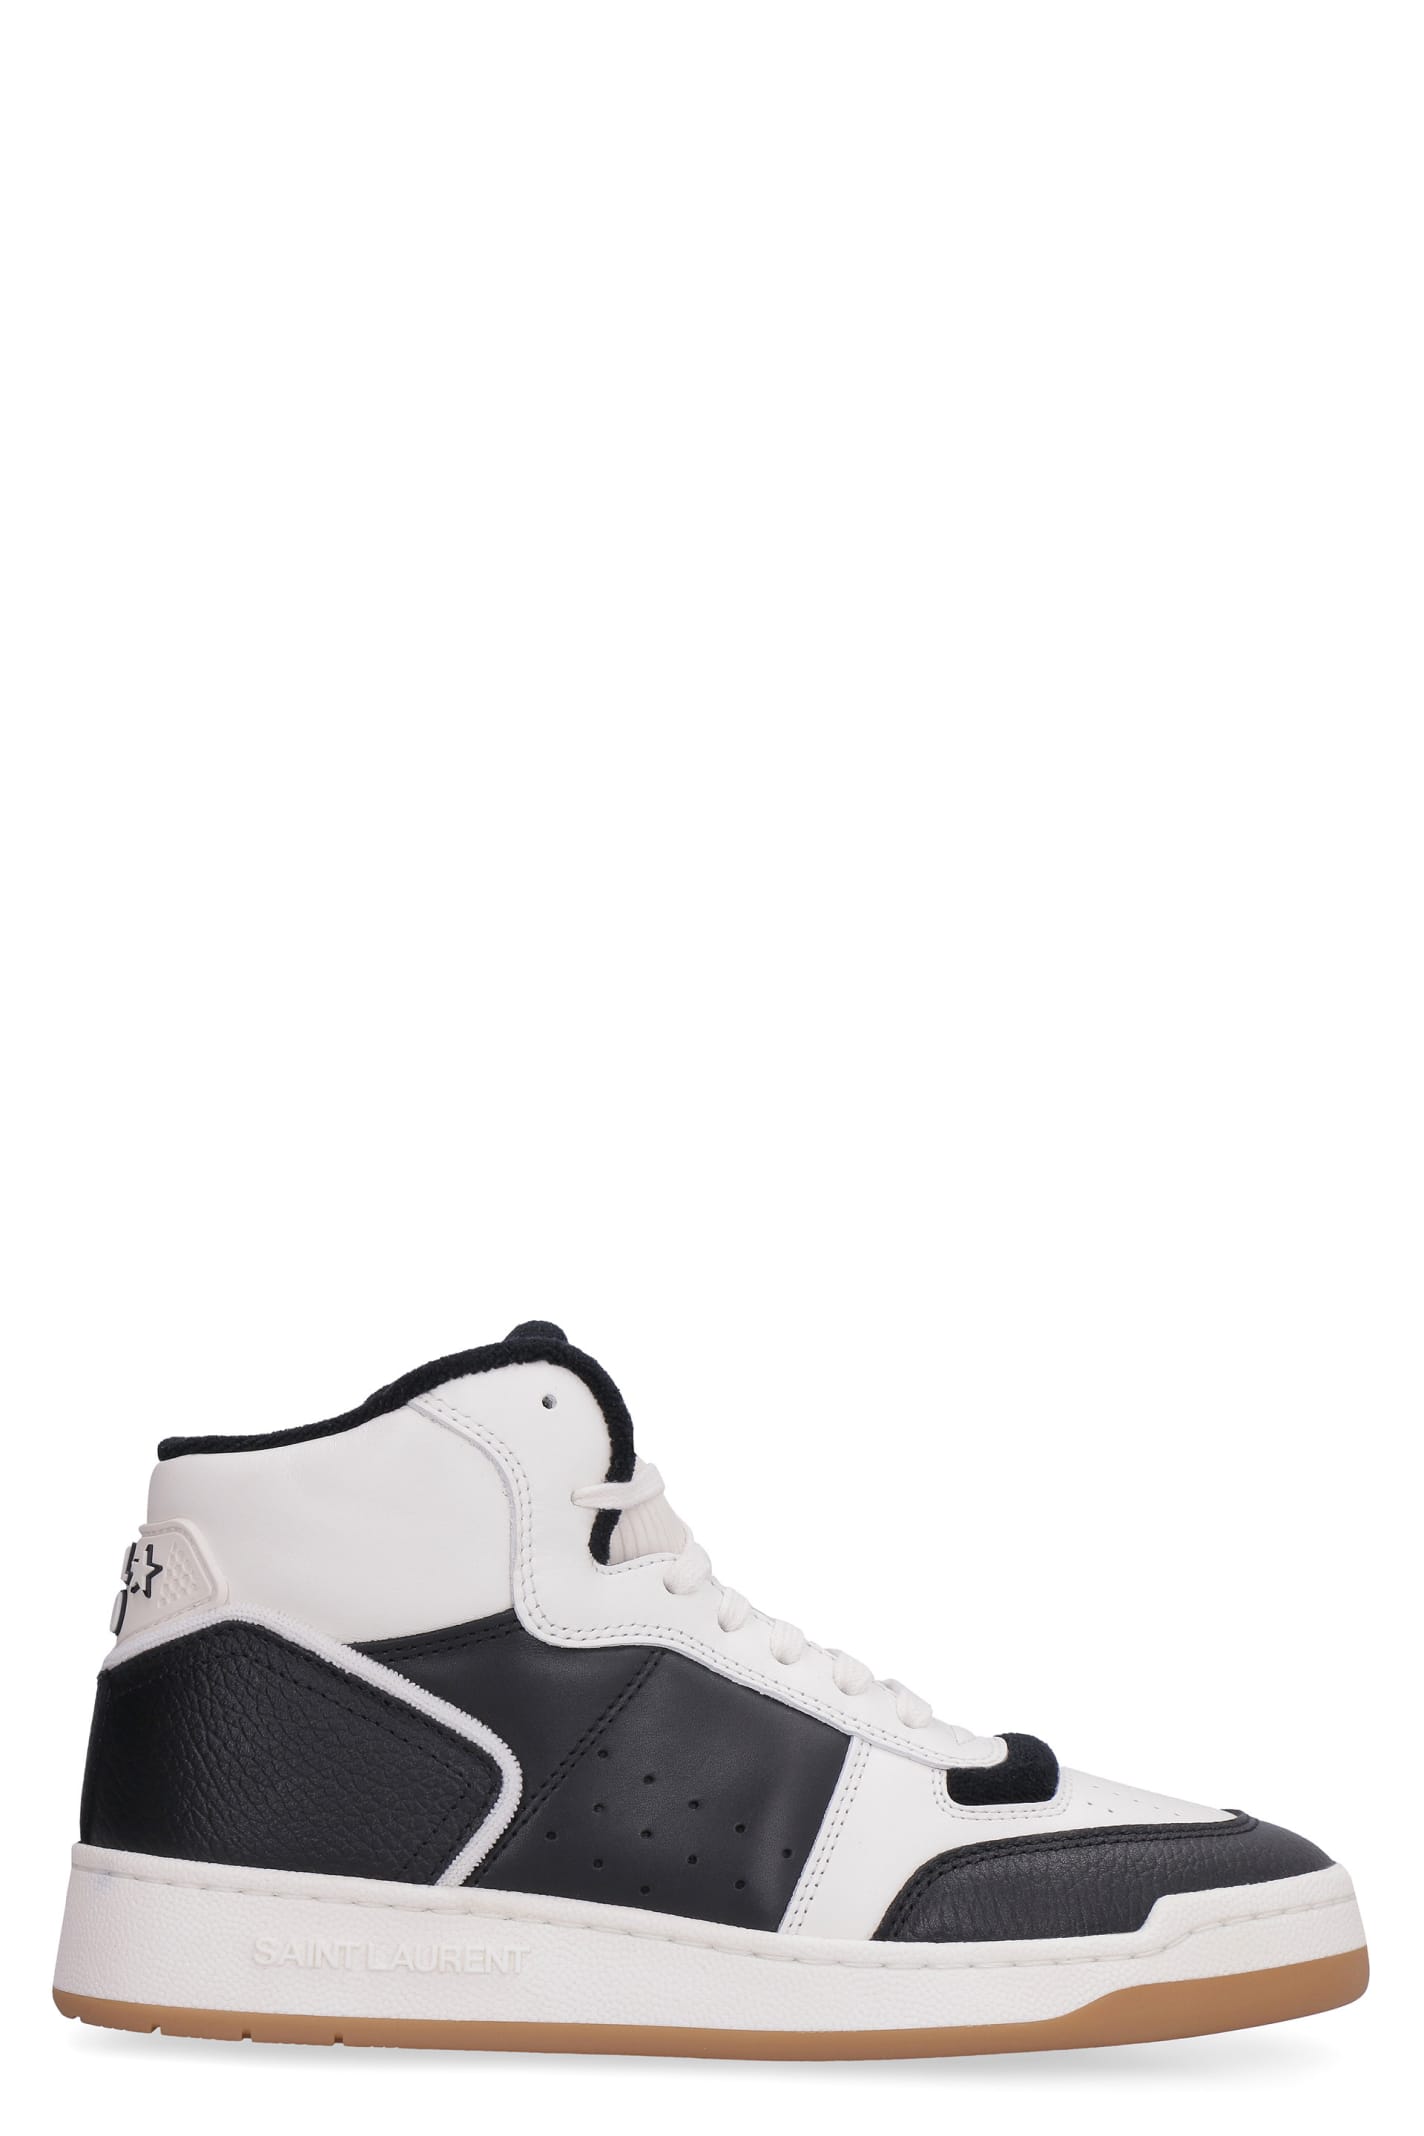 SAINT LAURENT LEATHER HIGH-TOP SNEAKERS